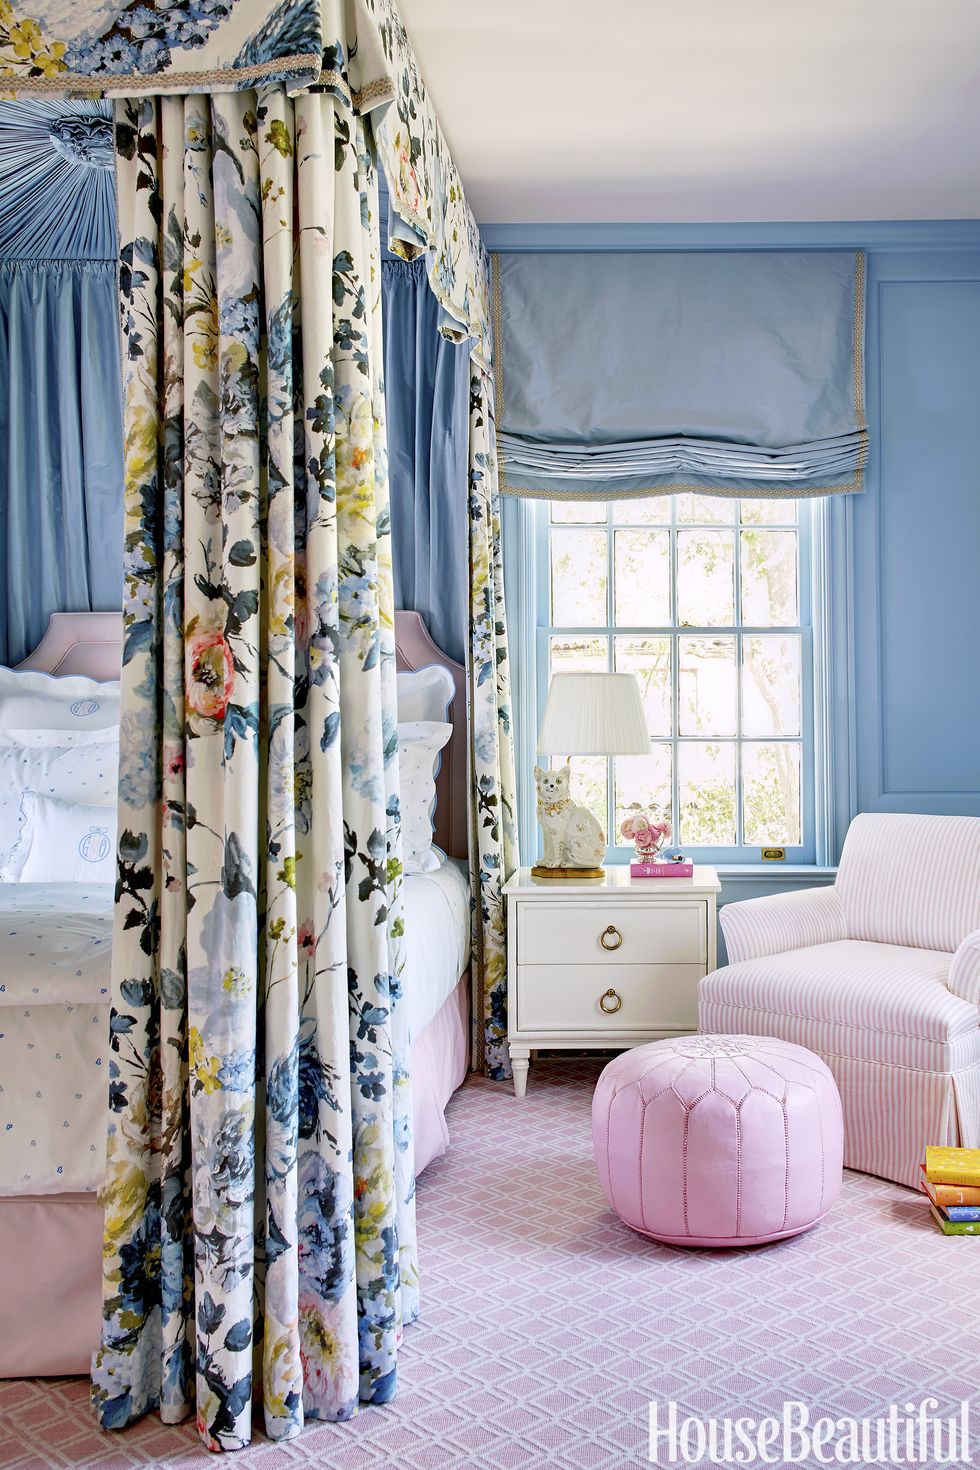 In the bedroom of her young daughter, Grace, McCarthy conjures a "full-on princess fantasy" with a bed canopy in a Designers Guild floral. 